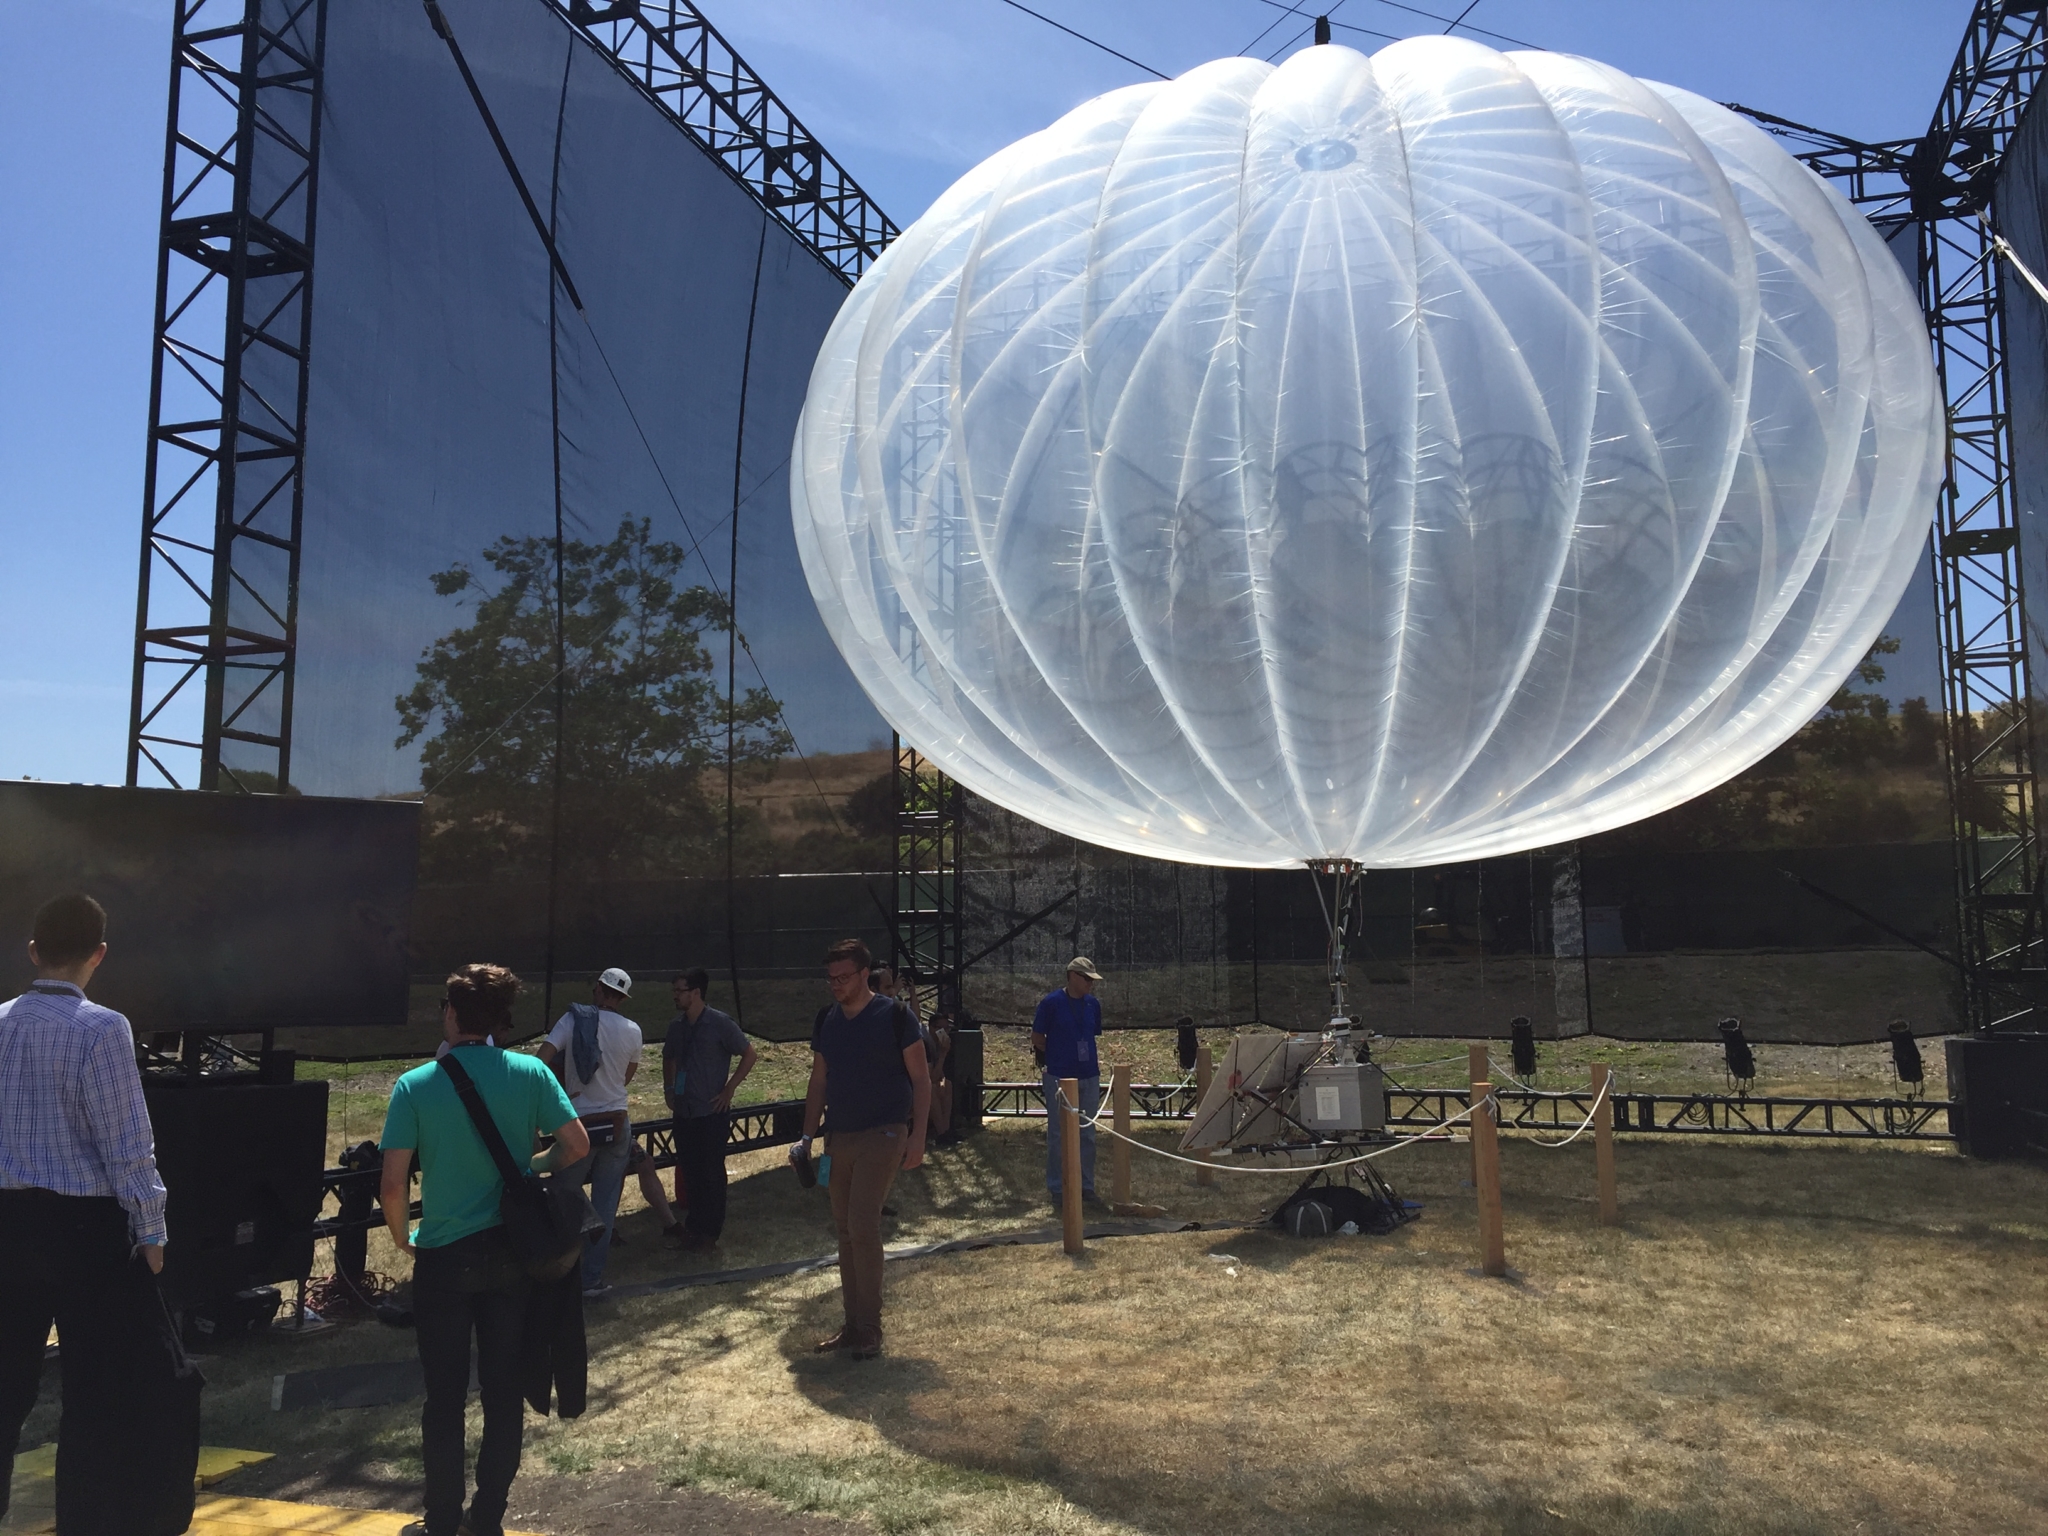 Project Loon 4G Balloons Provide Access The Project